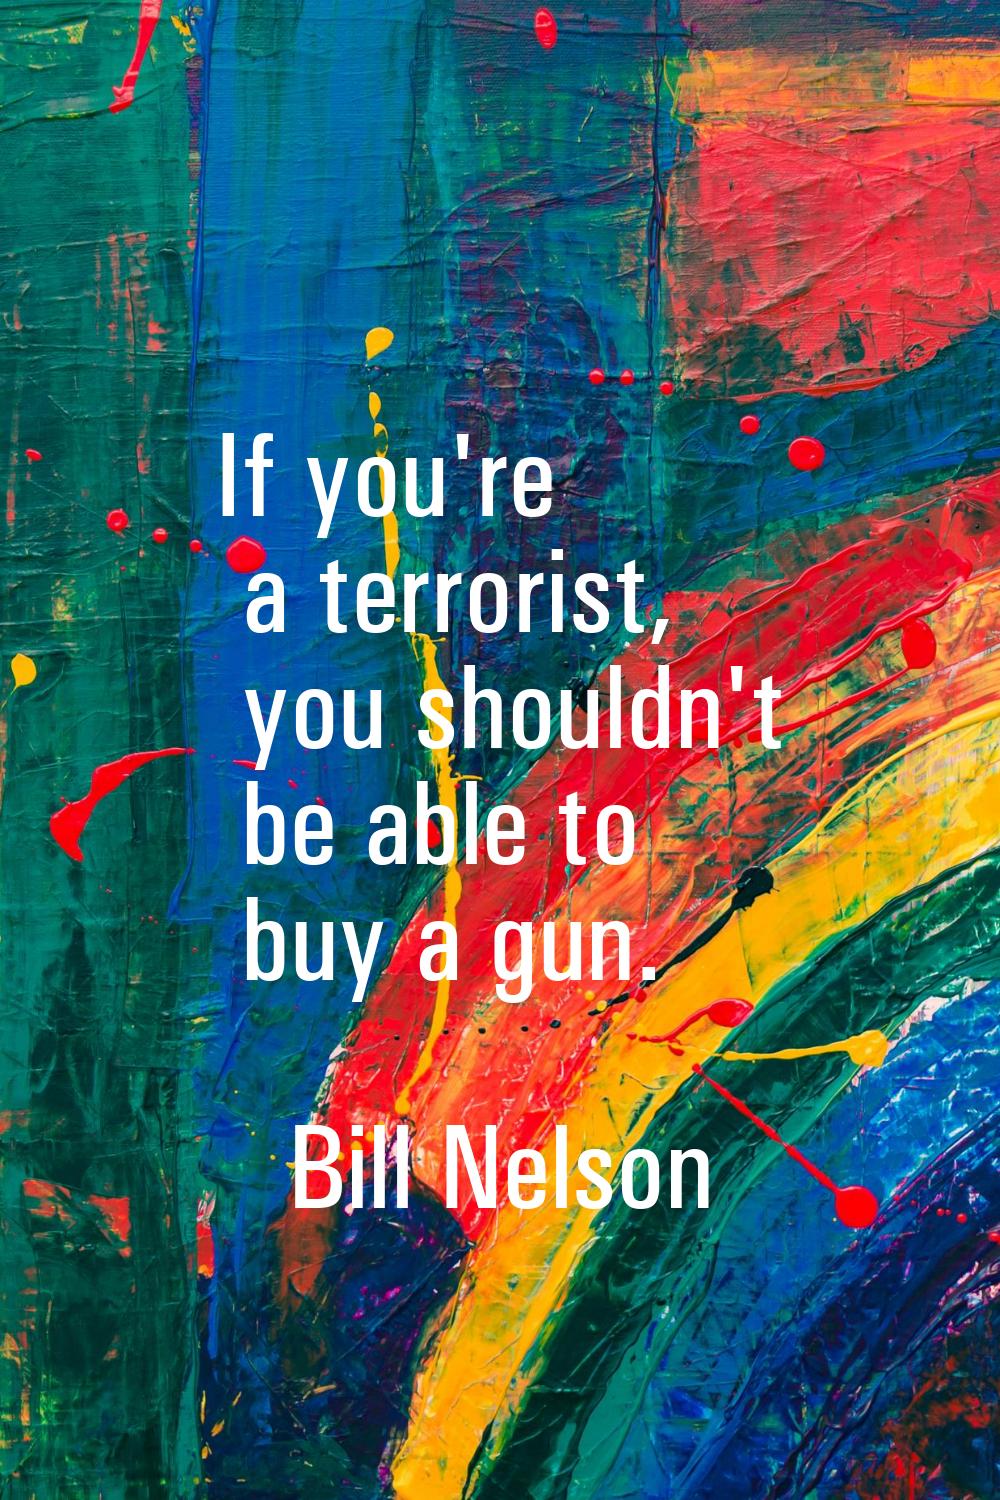 If you're a terrorist, you shouldn't be able to buy a gun.